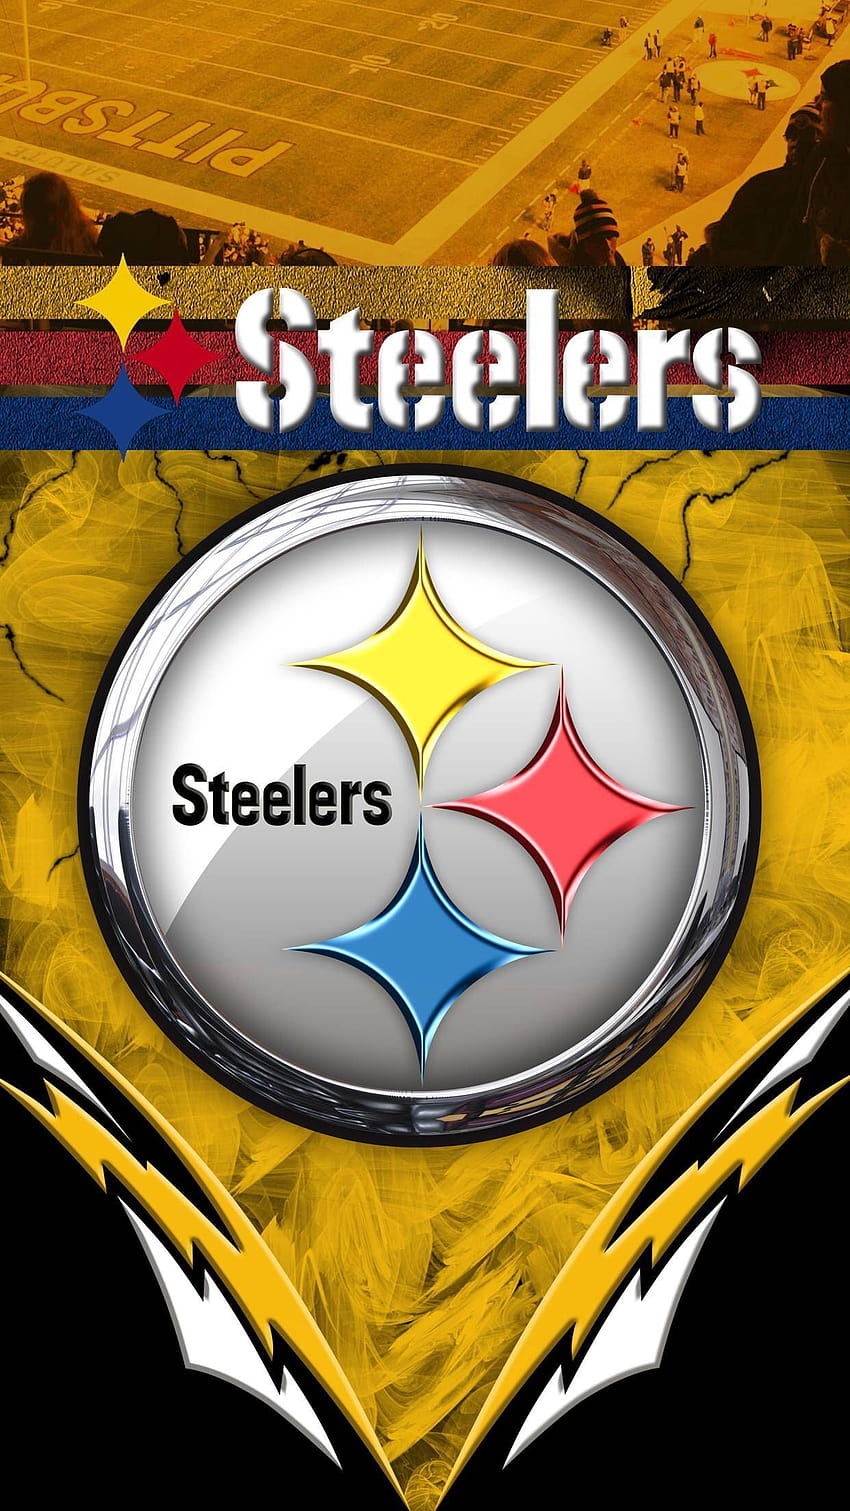 PITTSBURGH STEELERS PHONE BACKGROUNDS IN 2019, pittsburgh steelers android HD phone wallpaper